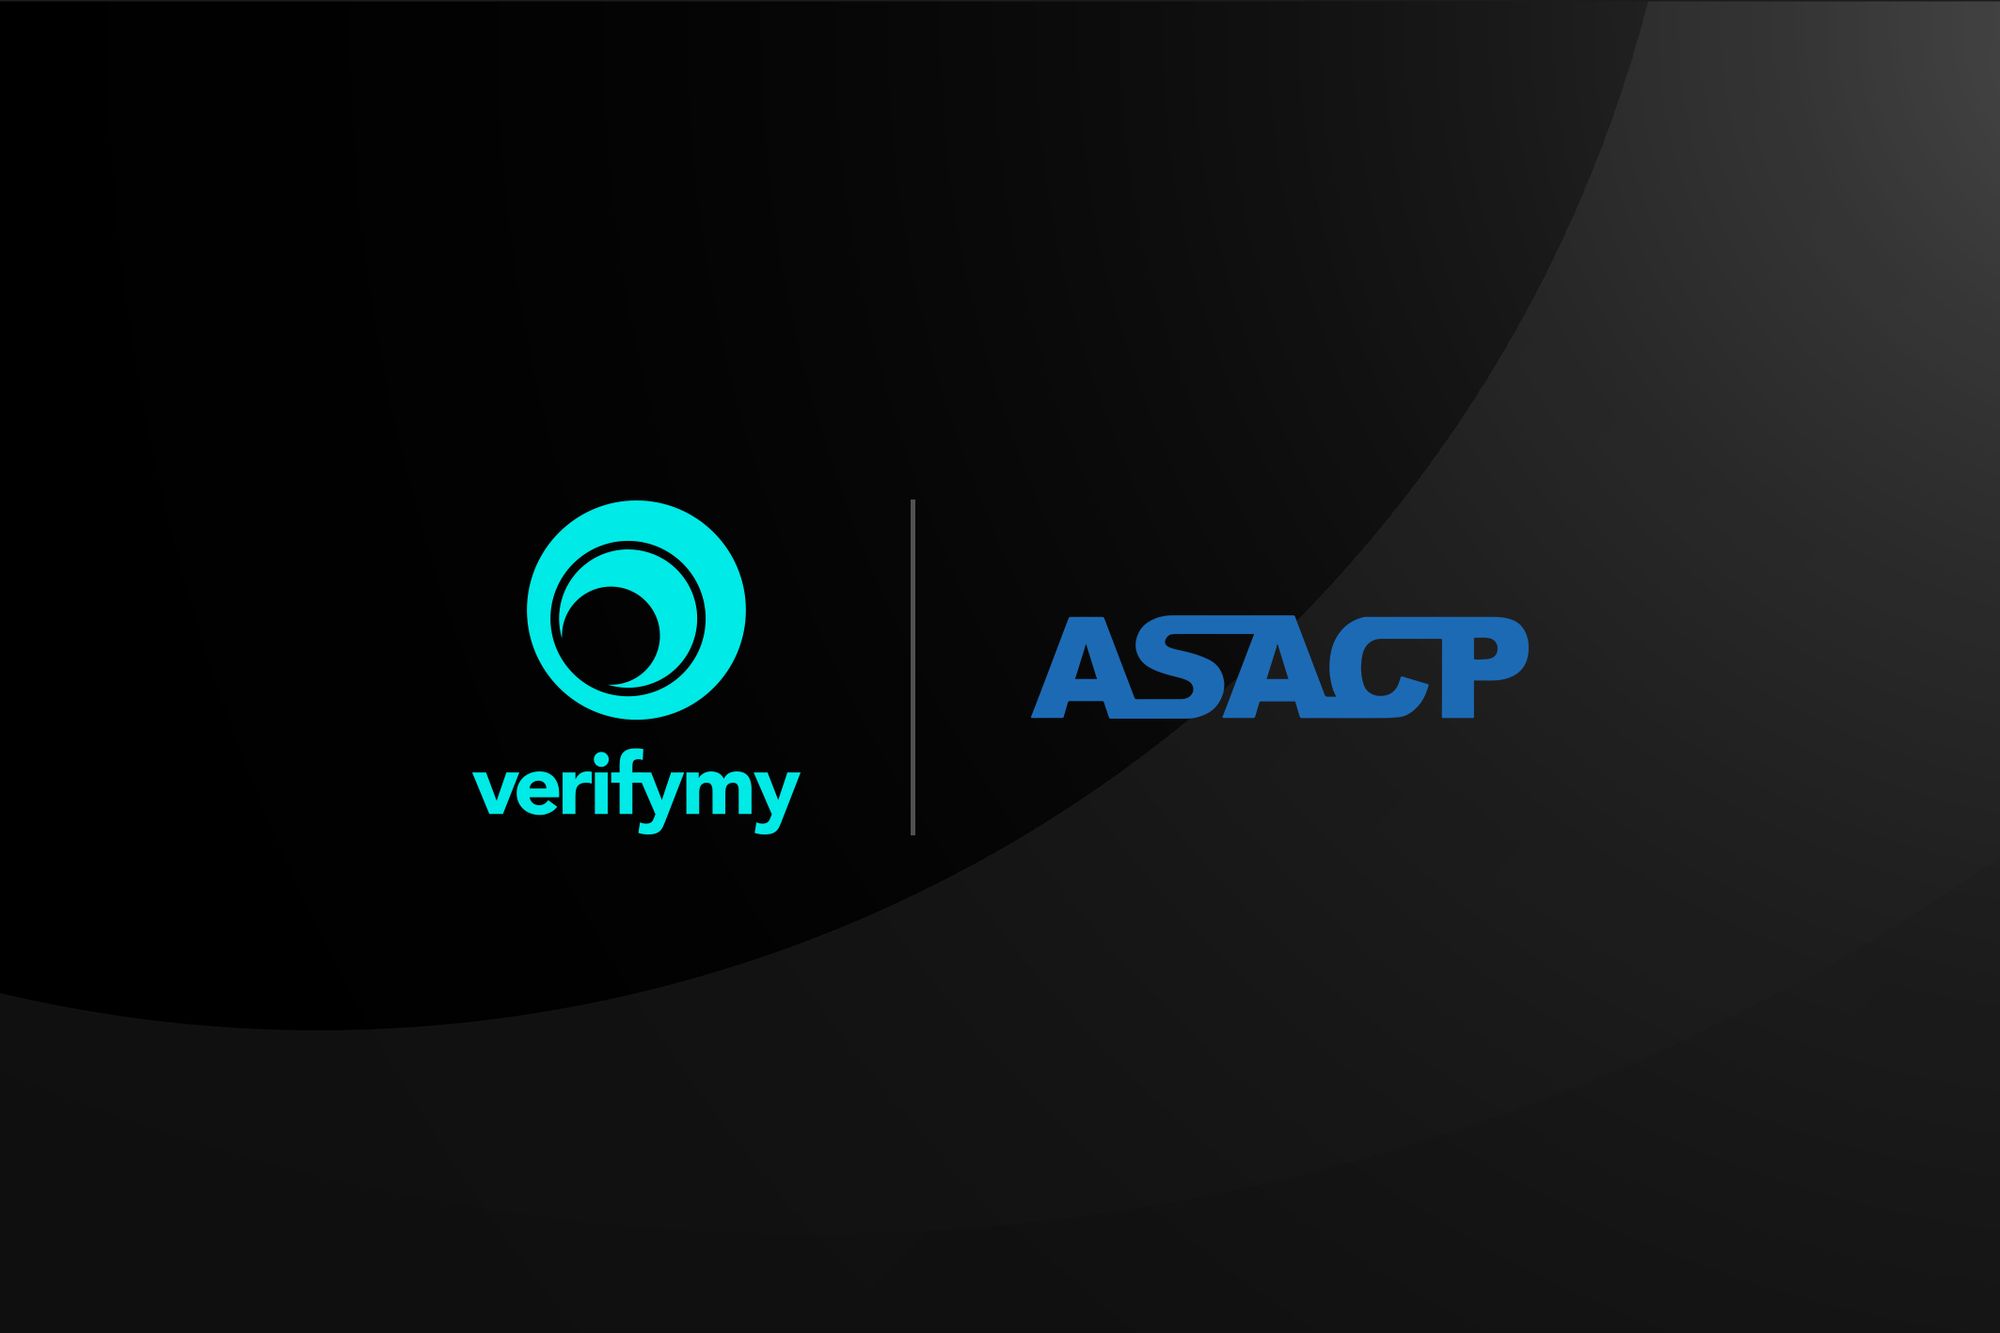 ASACP name VerifyMy as one of its valued Featured Sponsors for December 2022